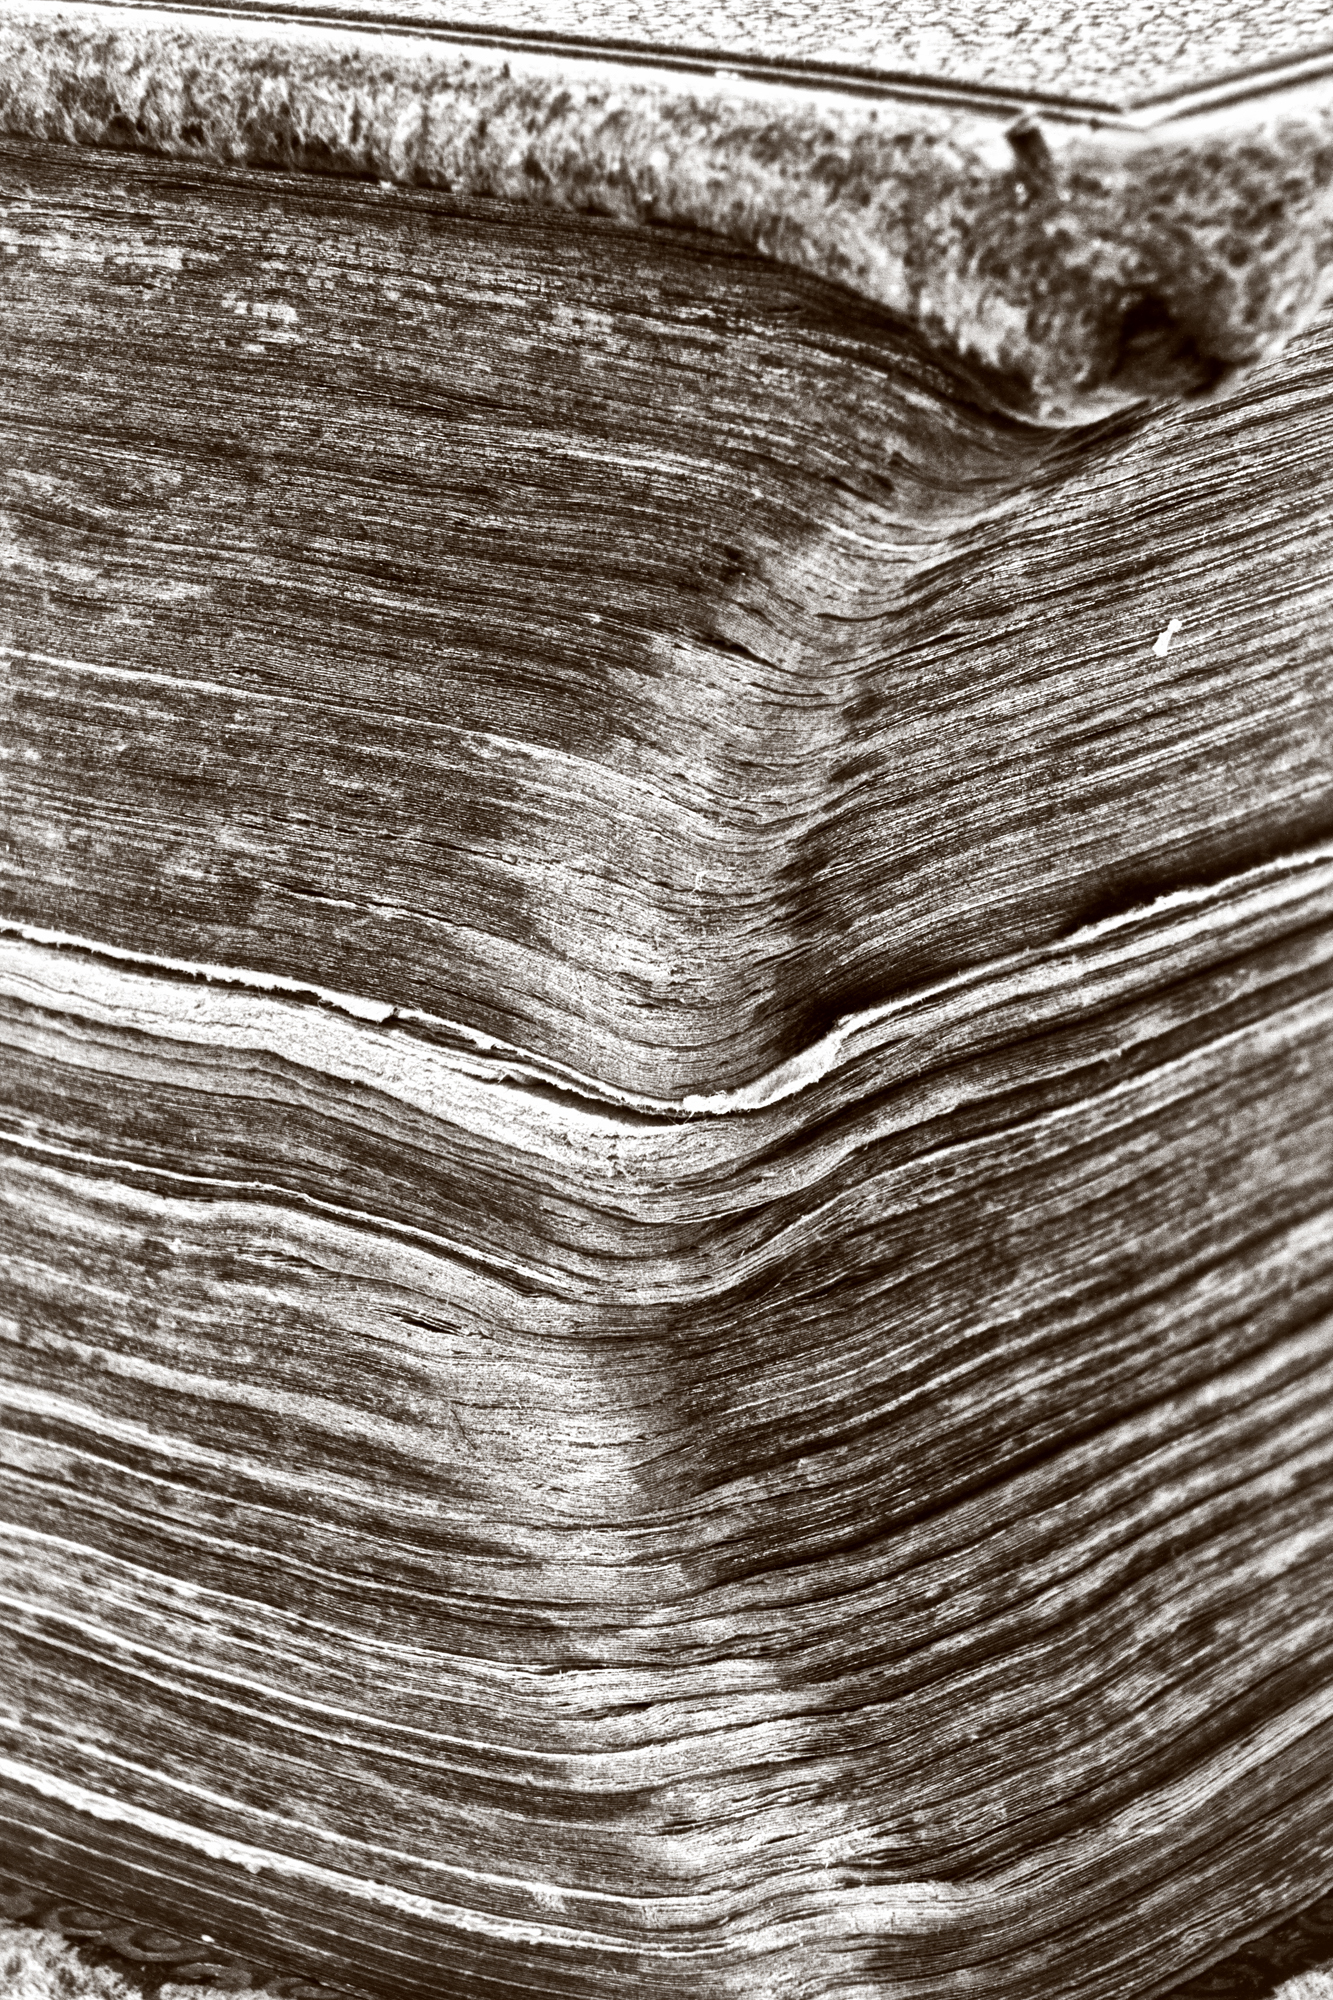 Pages of a book photo